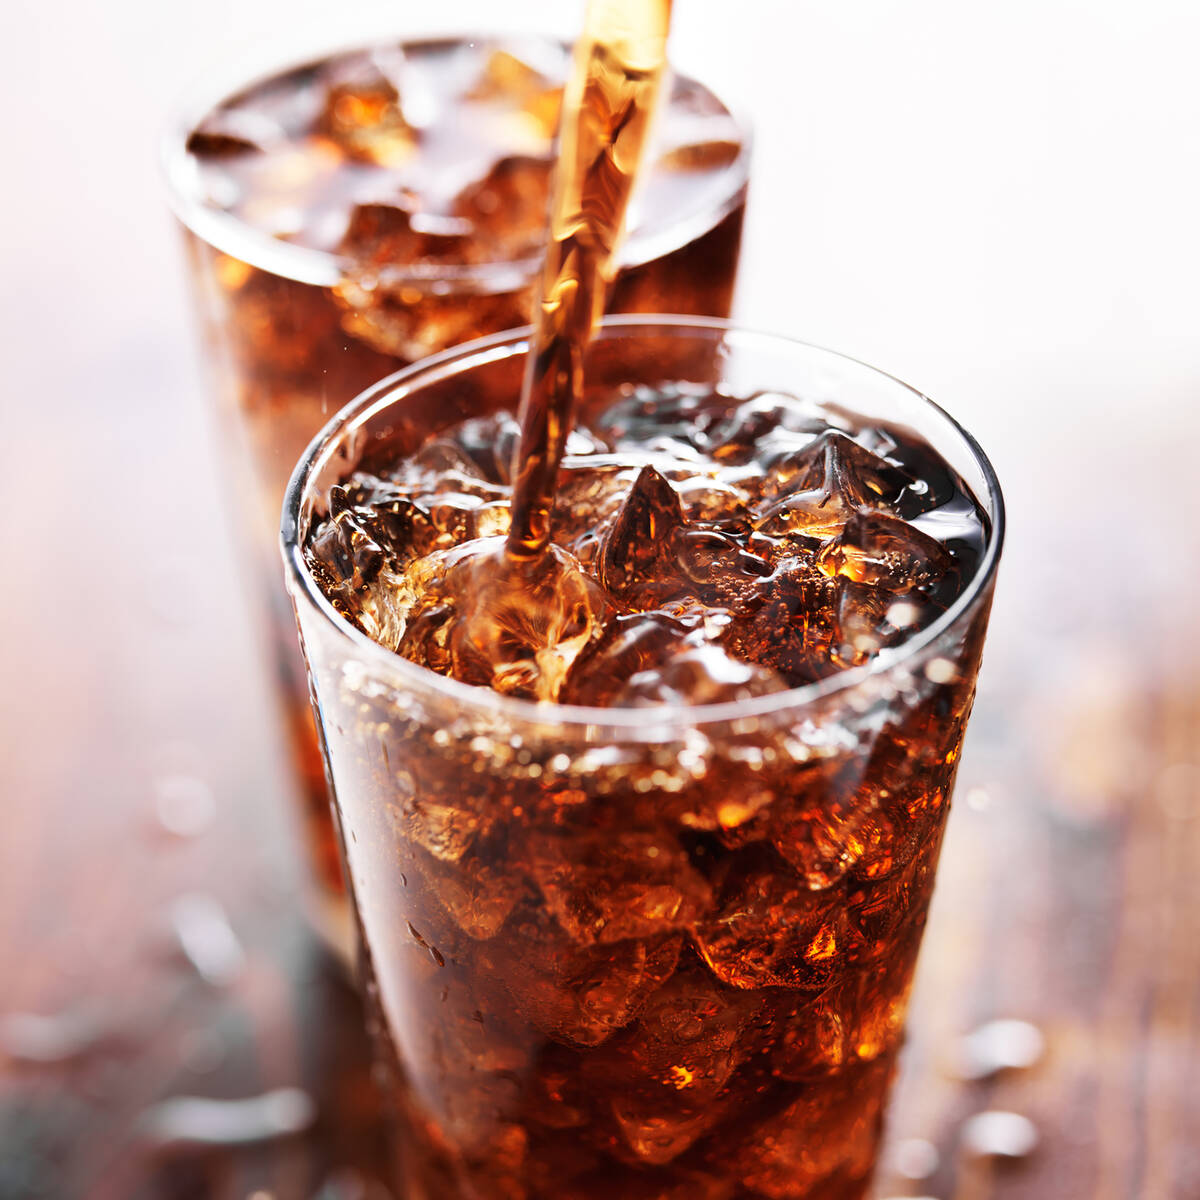 People with arthritis should limit consumption of soda and other sugary drinks. (Getty Images)